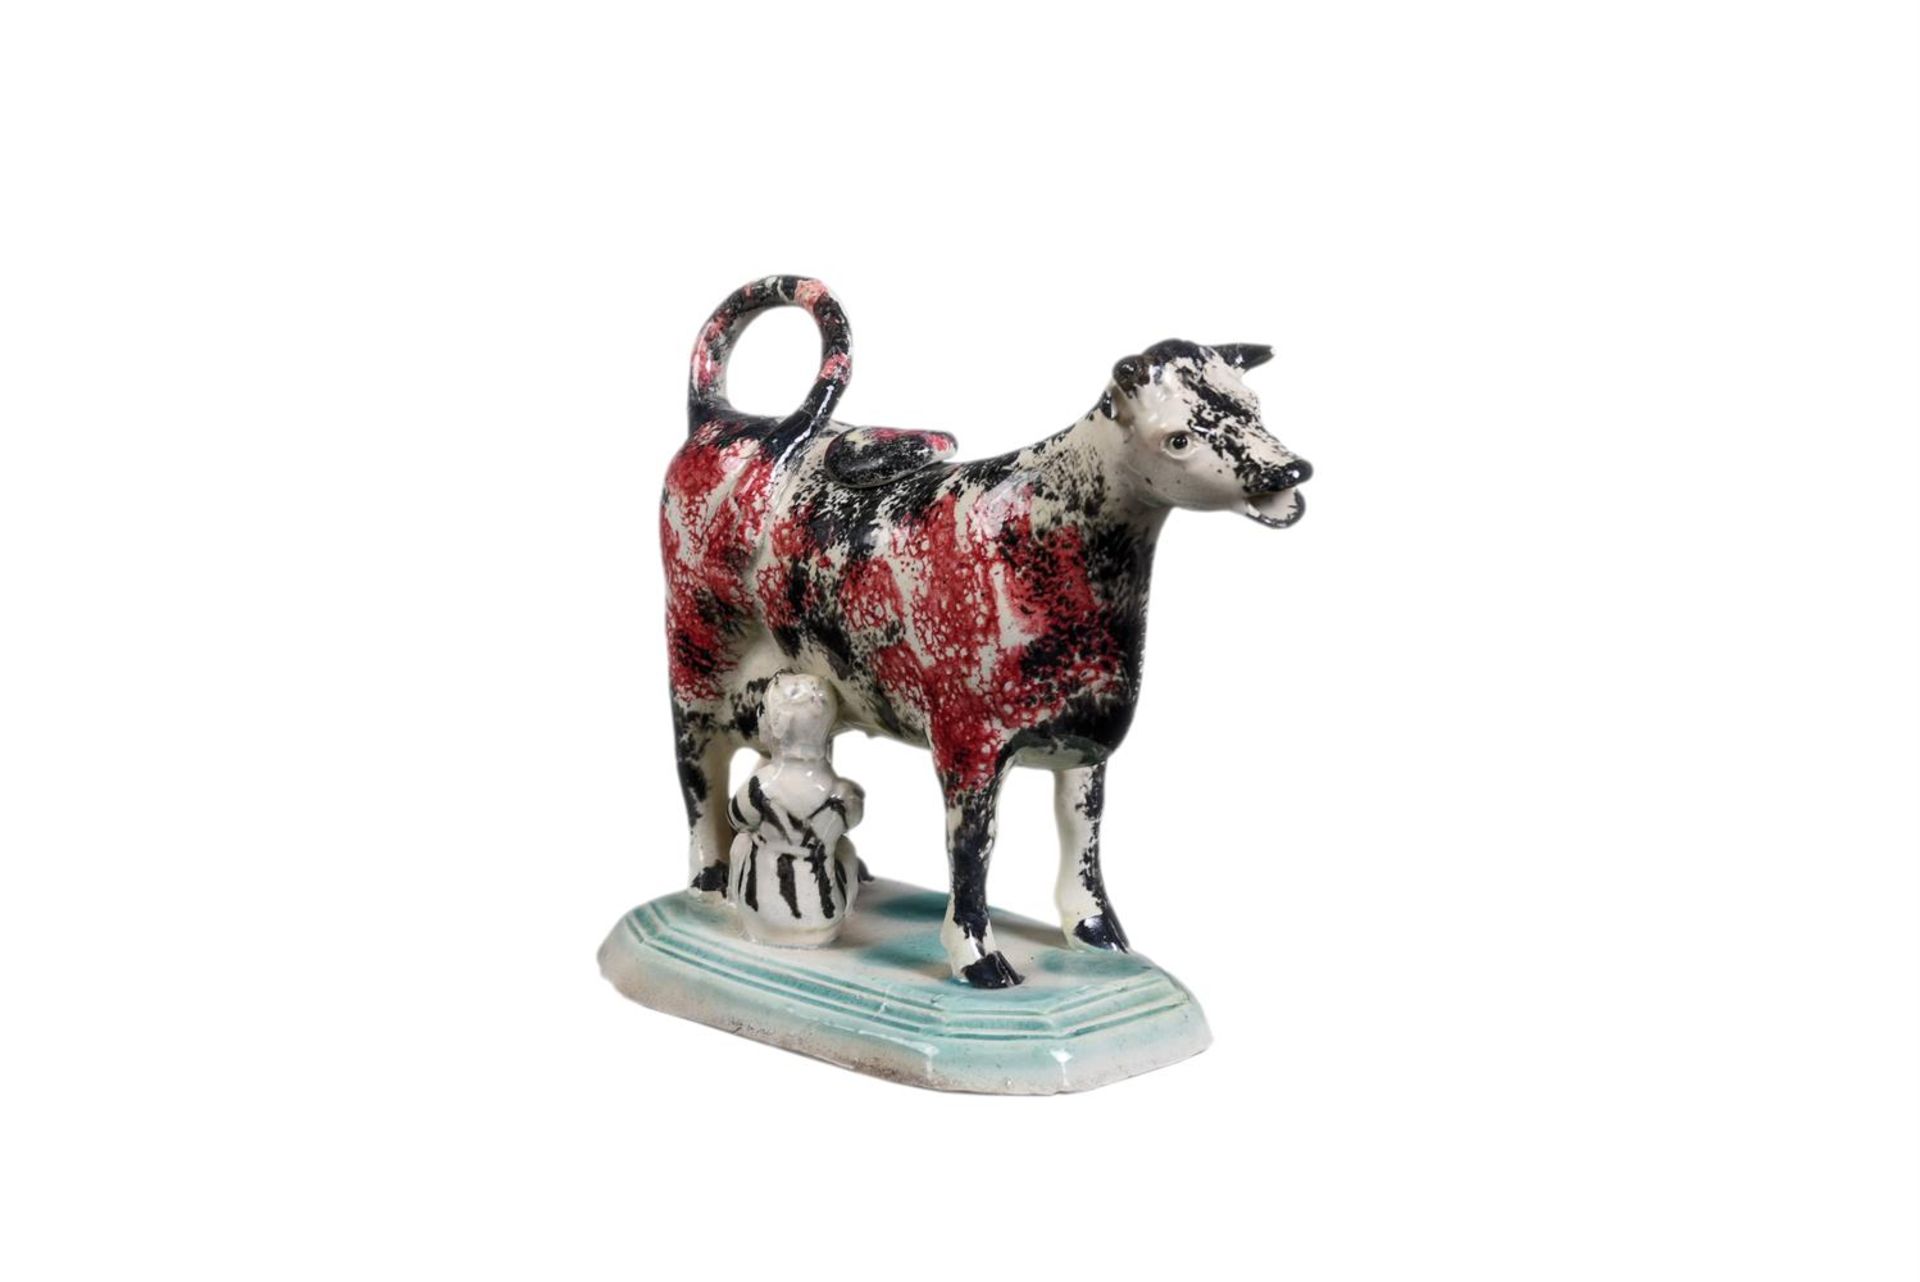 AN ENGLISH PEARLWARE SPONGE-DECORATED COW-CREAMER WITH MILKMAID - Image 2 of 4